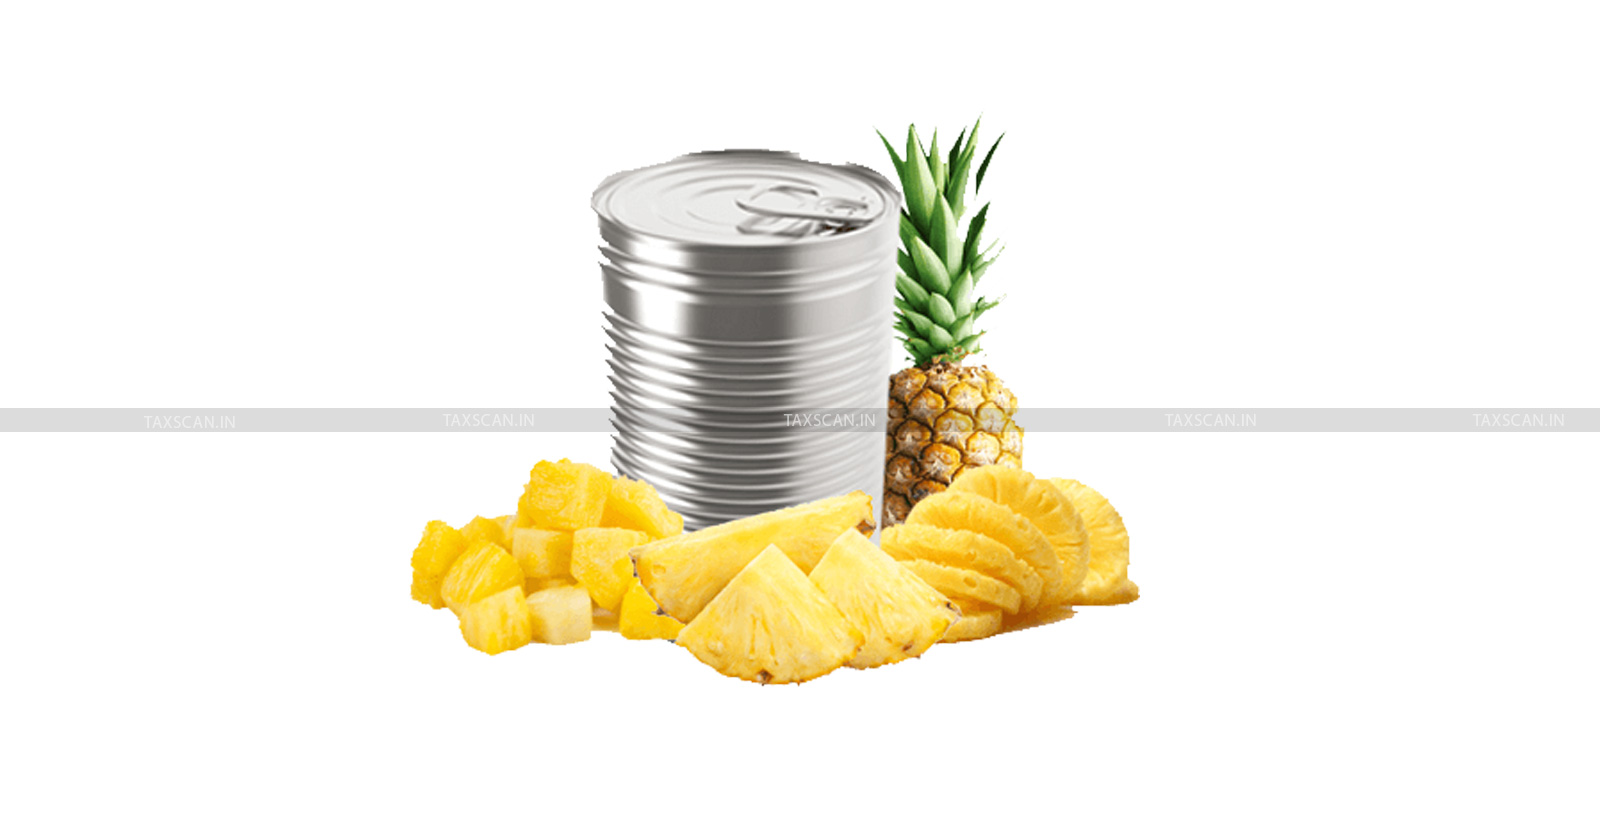 Canned pineapple slices - Customs Duty - CESTAT - pineapple slices - Service Tax - TAXSCAN